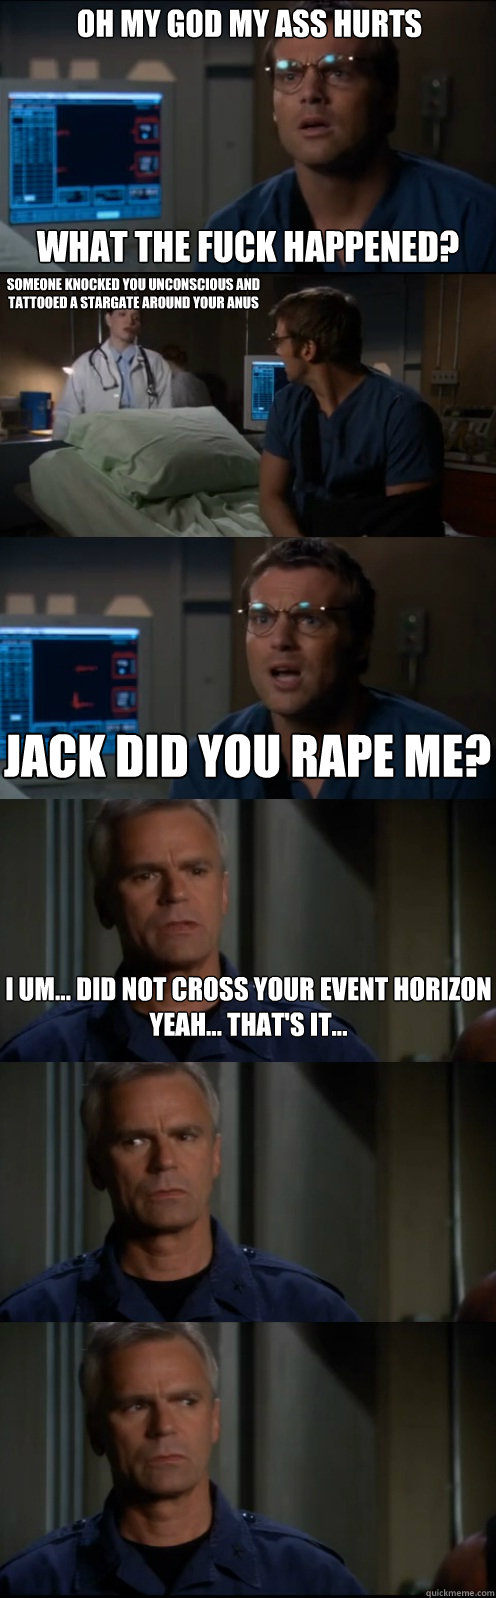 Oh my God My ass hurts What the fuck happened? Someone knocked you unconscious and tattooed a stargate around your anus  Jack did you rape me? I um... did not cross your event horizon
Yeah... that's it... - Oh my God My ass hurts What the fuck happened? Someone knocked you unconscious and tattooed a stargate around your anus  Jack did you rape me? I um... did not cross your event horizon
Yeah... that's it...  Through the Stargate